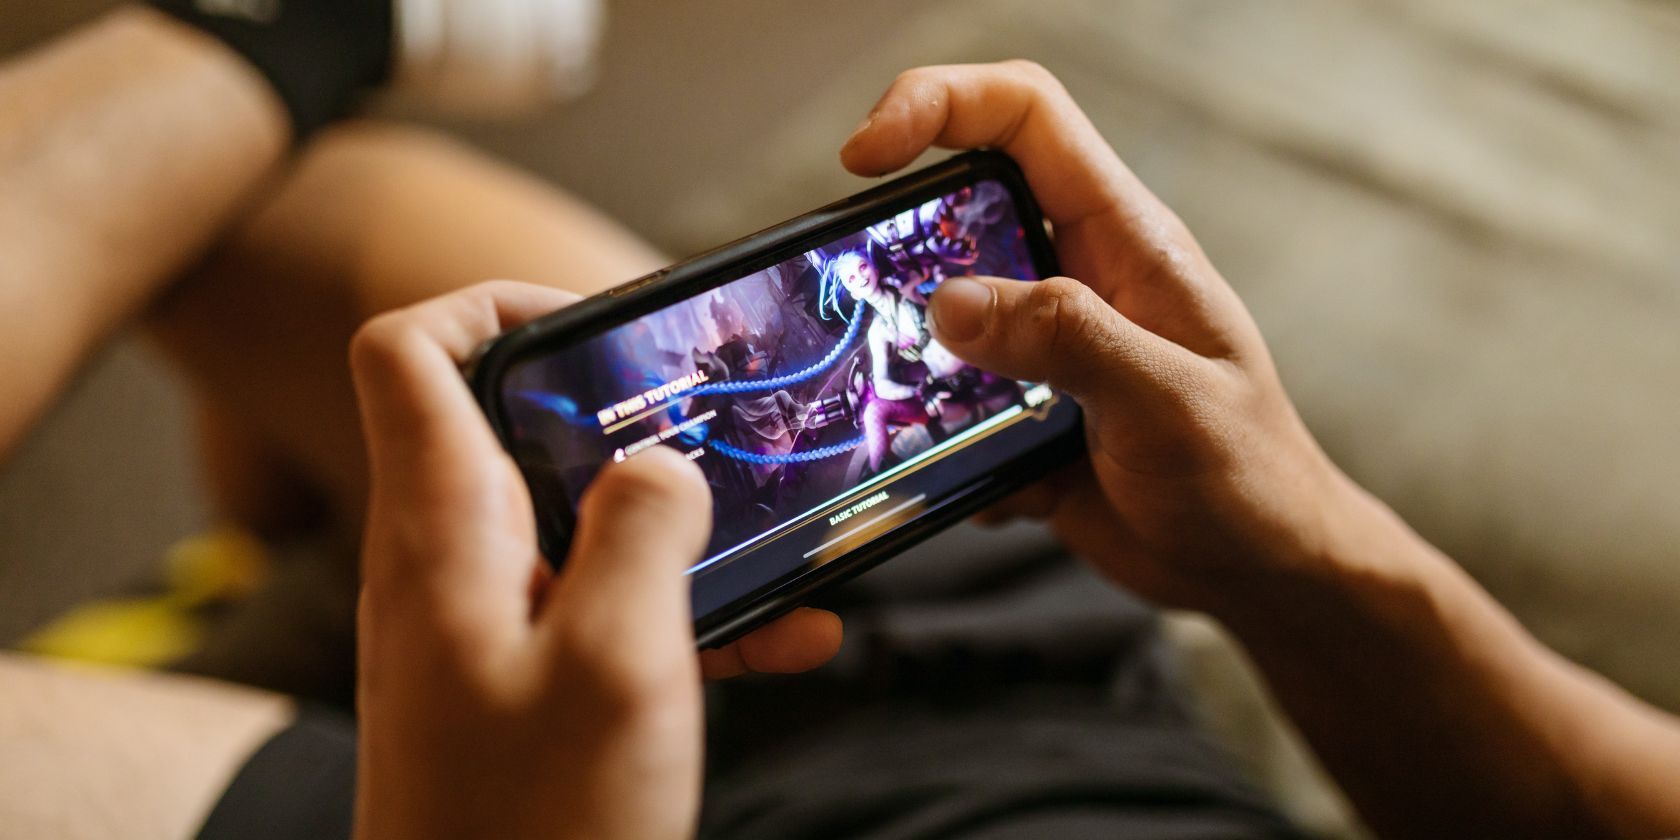 Guy playing mobile game on couch